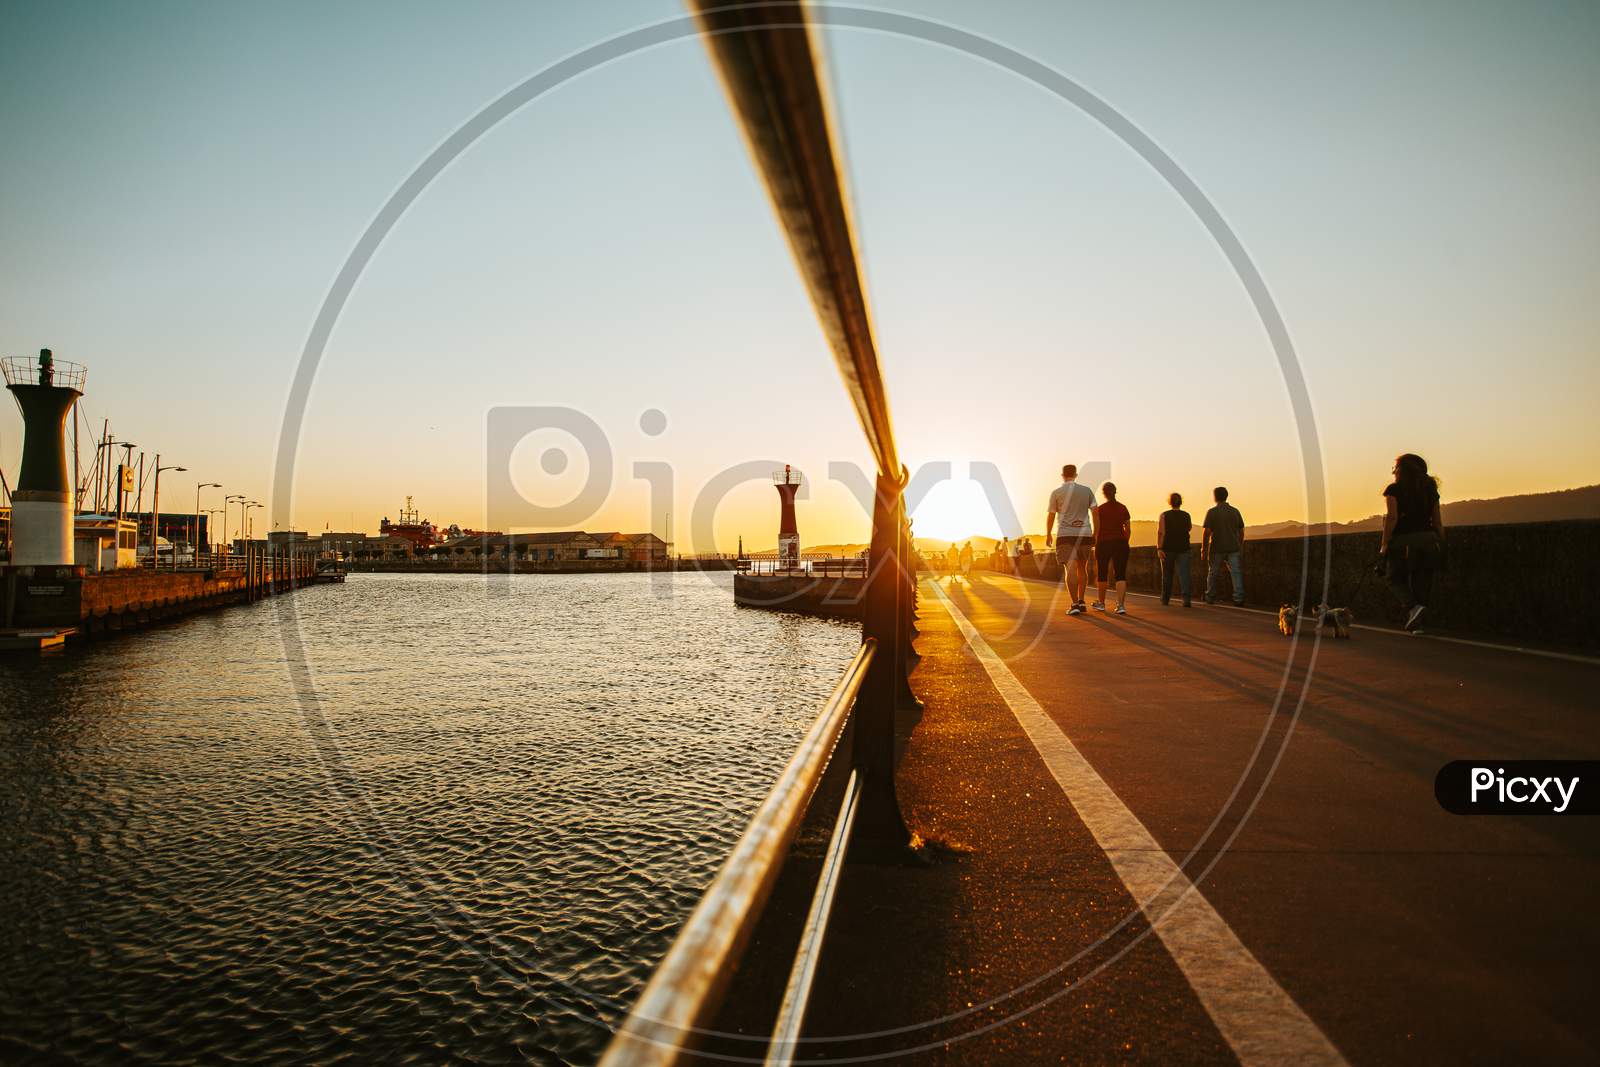 Walk On The Docks To The Lighthouse During A Burning Sunset With People Walking By